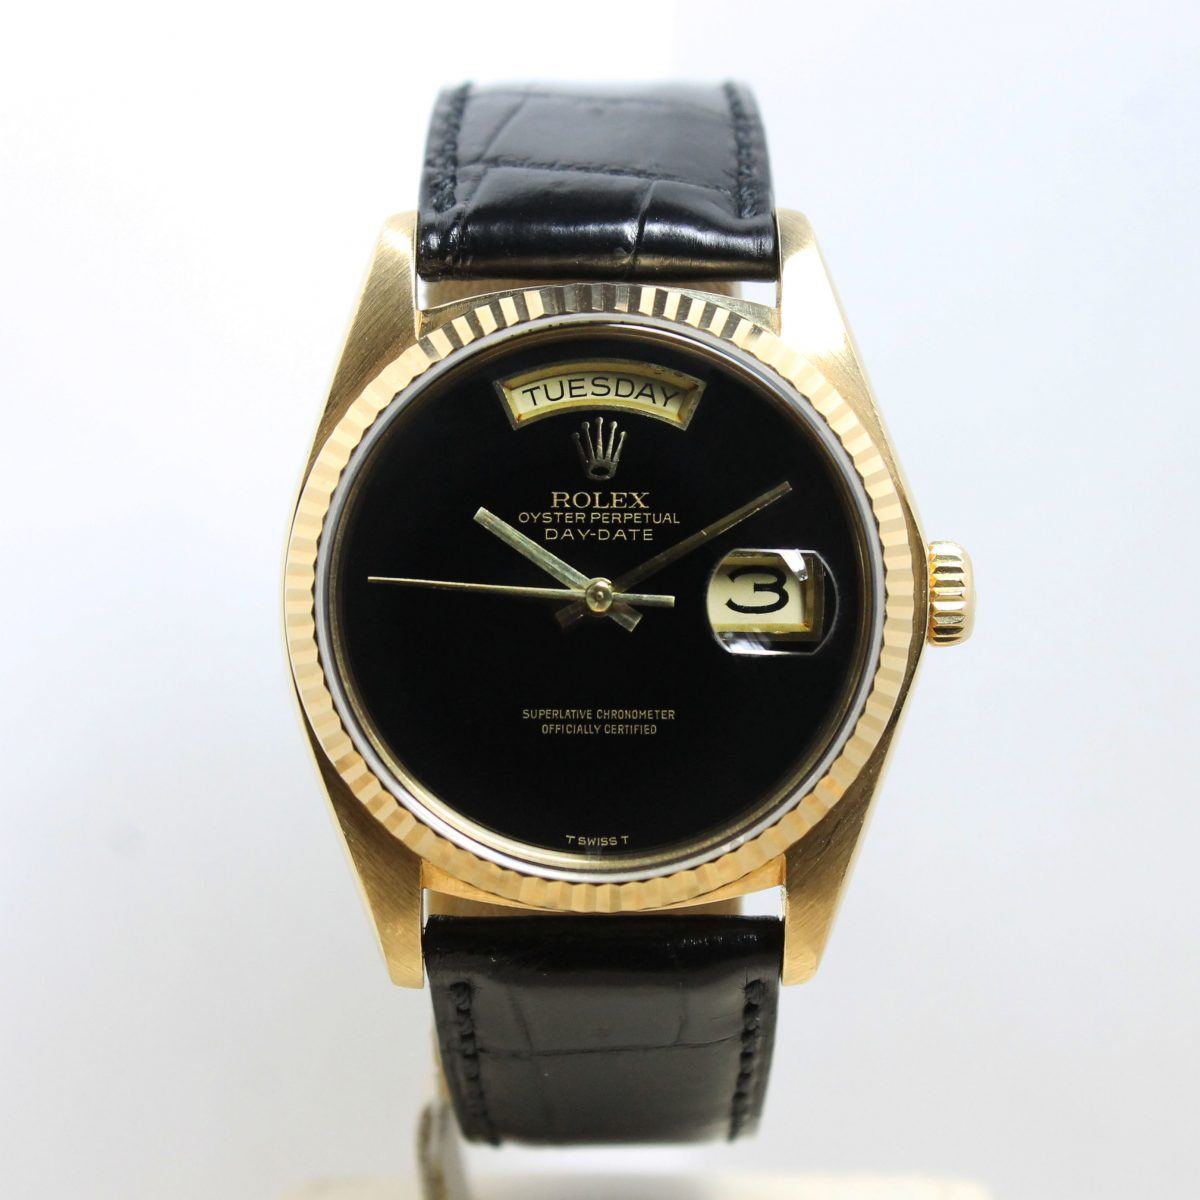 Rolex Day Date Onyx Dial Ref. 18038 with papers from 1979 - Rolex ...